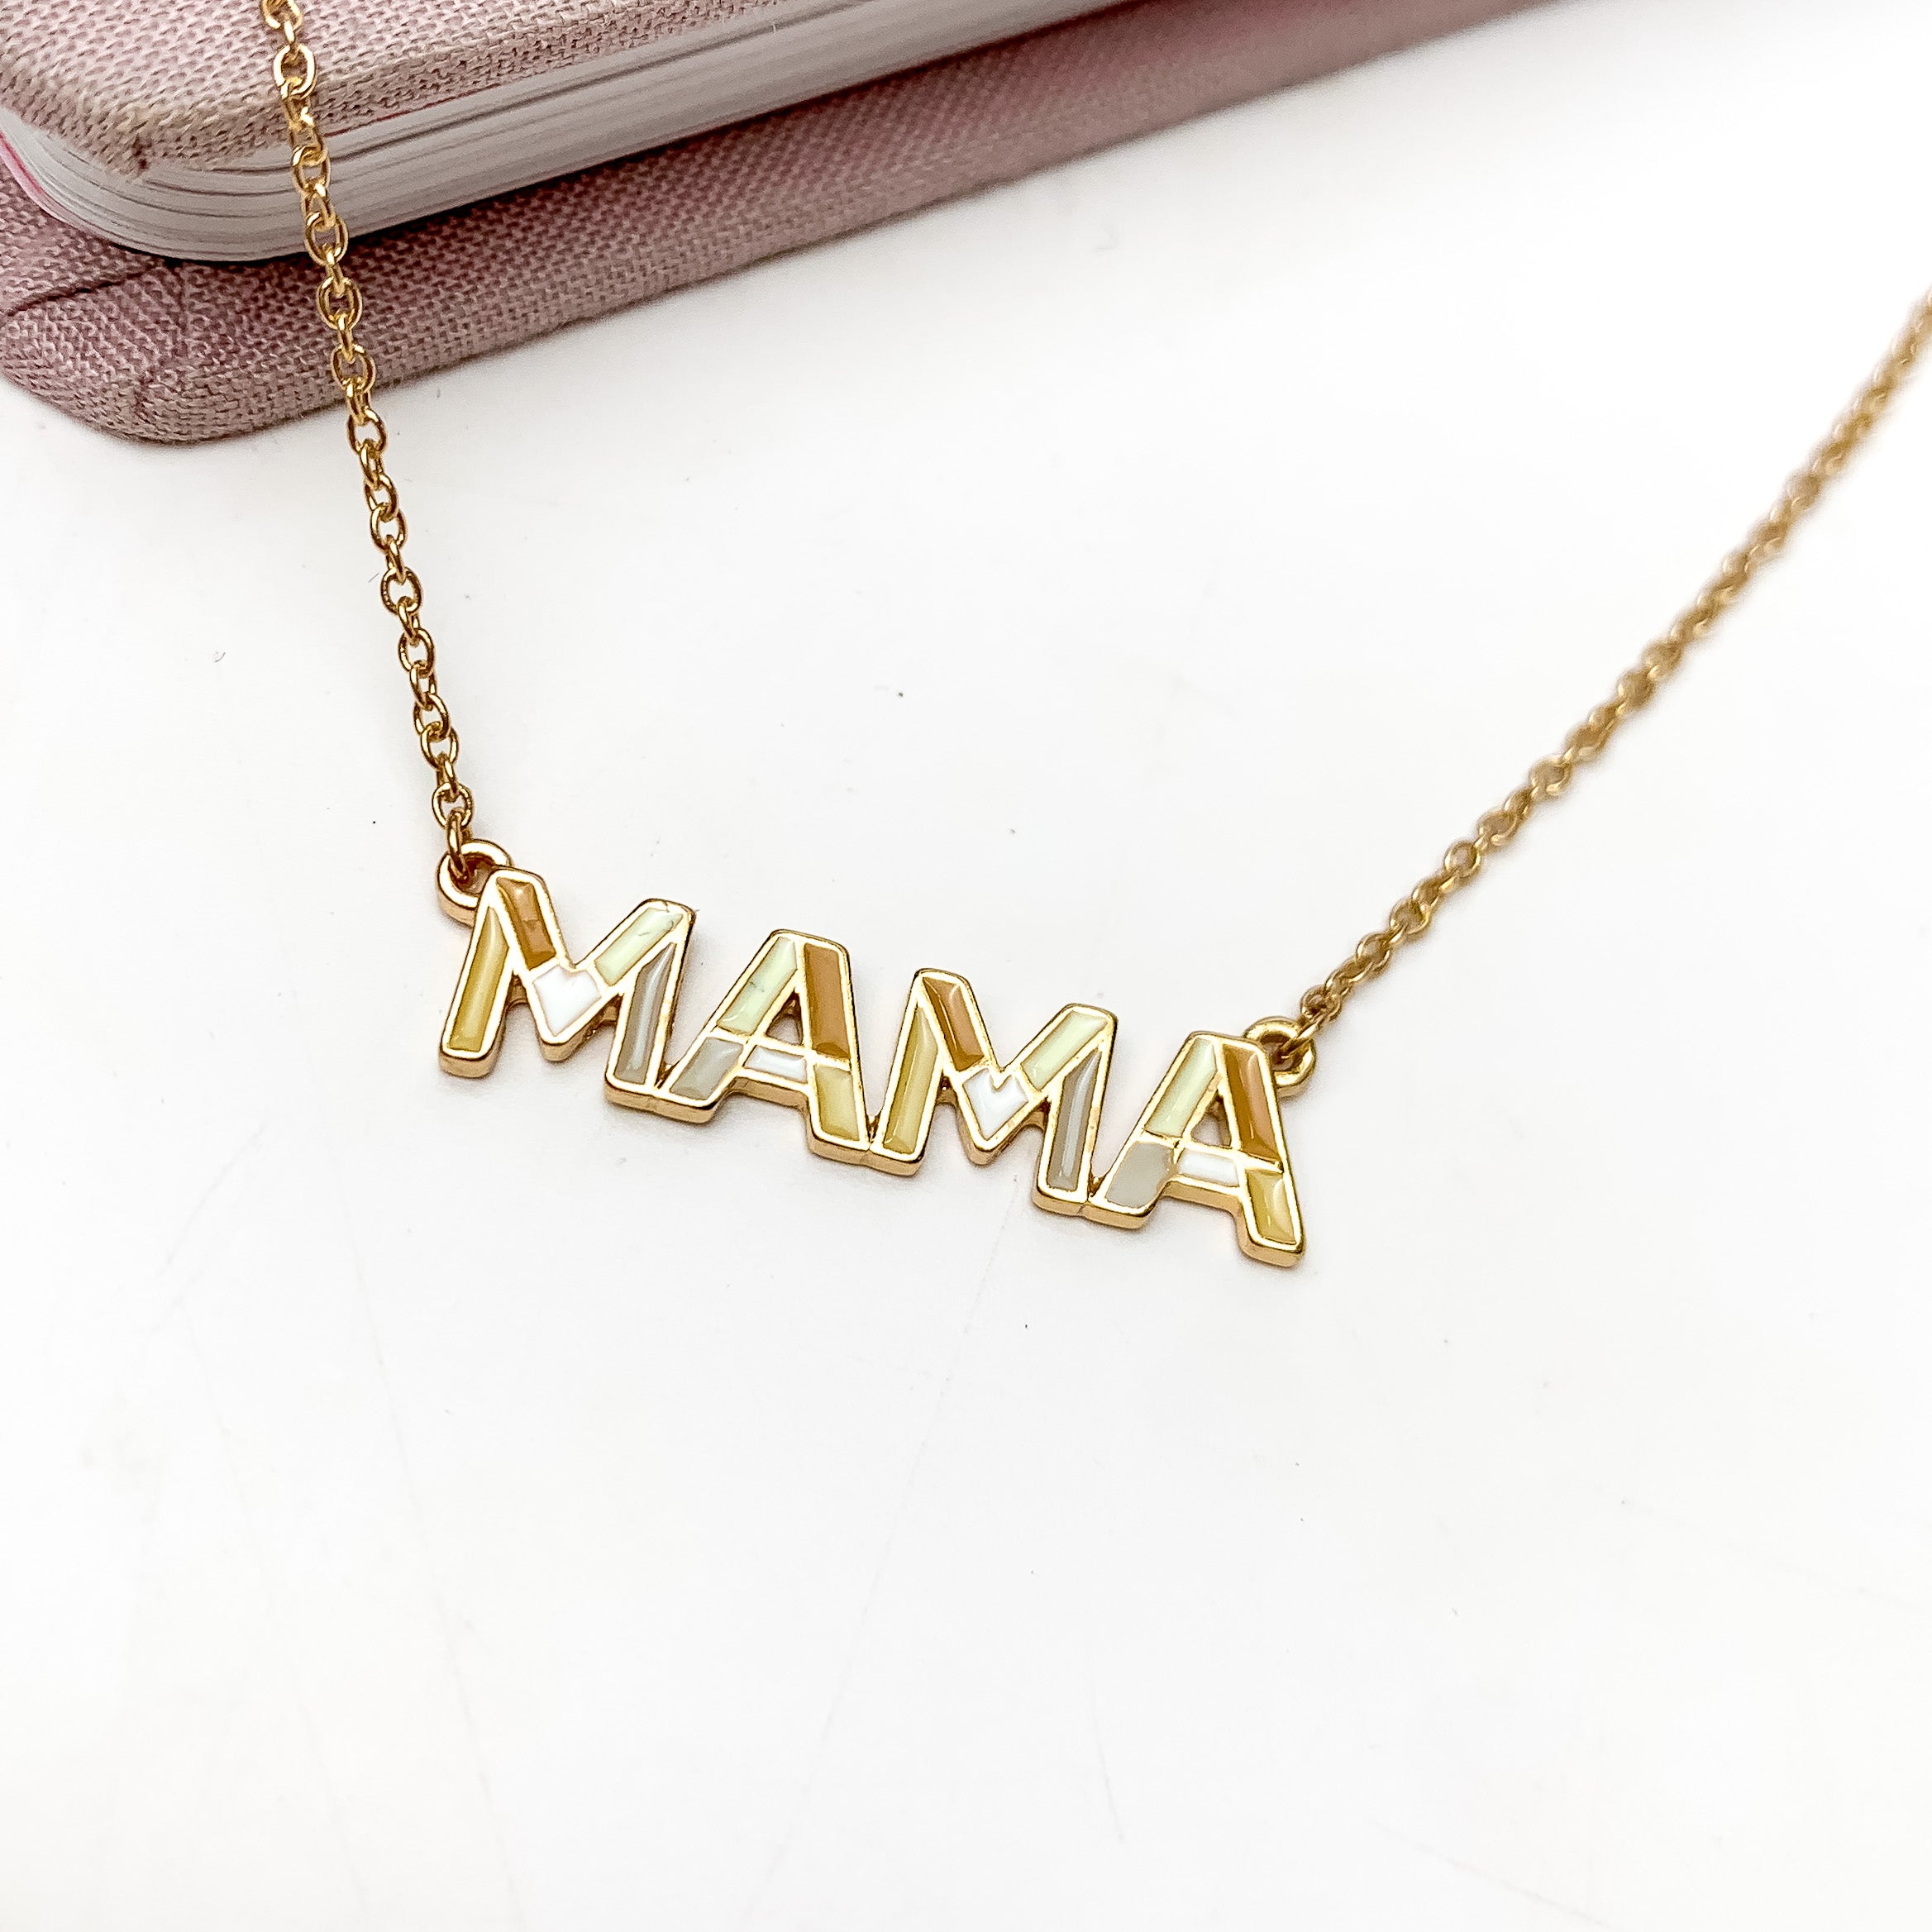 Mama Chain Necklace in Gold Tone With Brown Tones